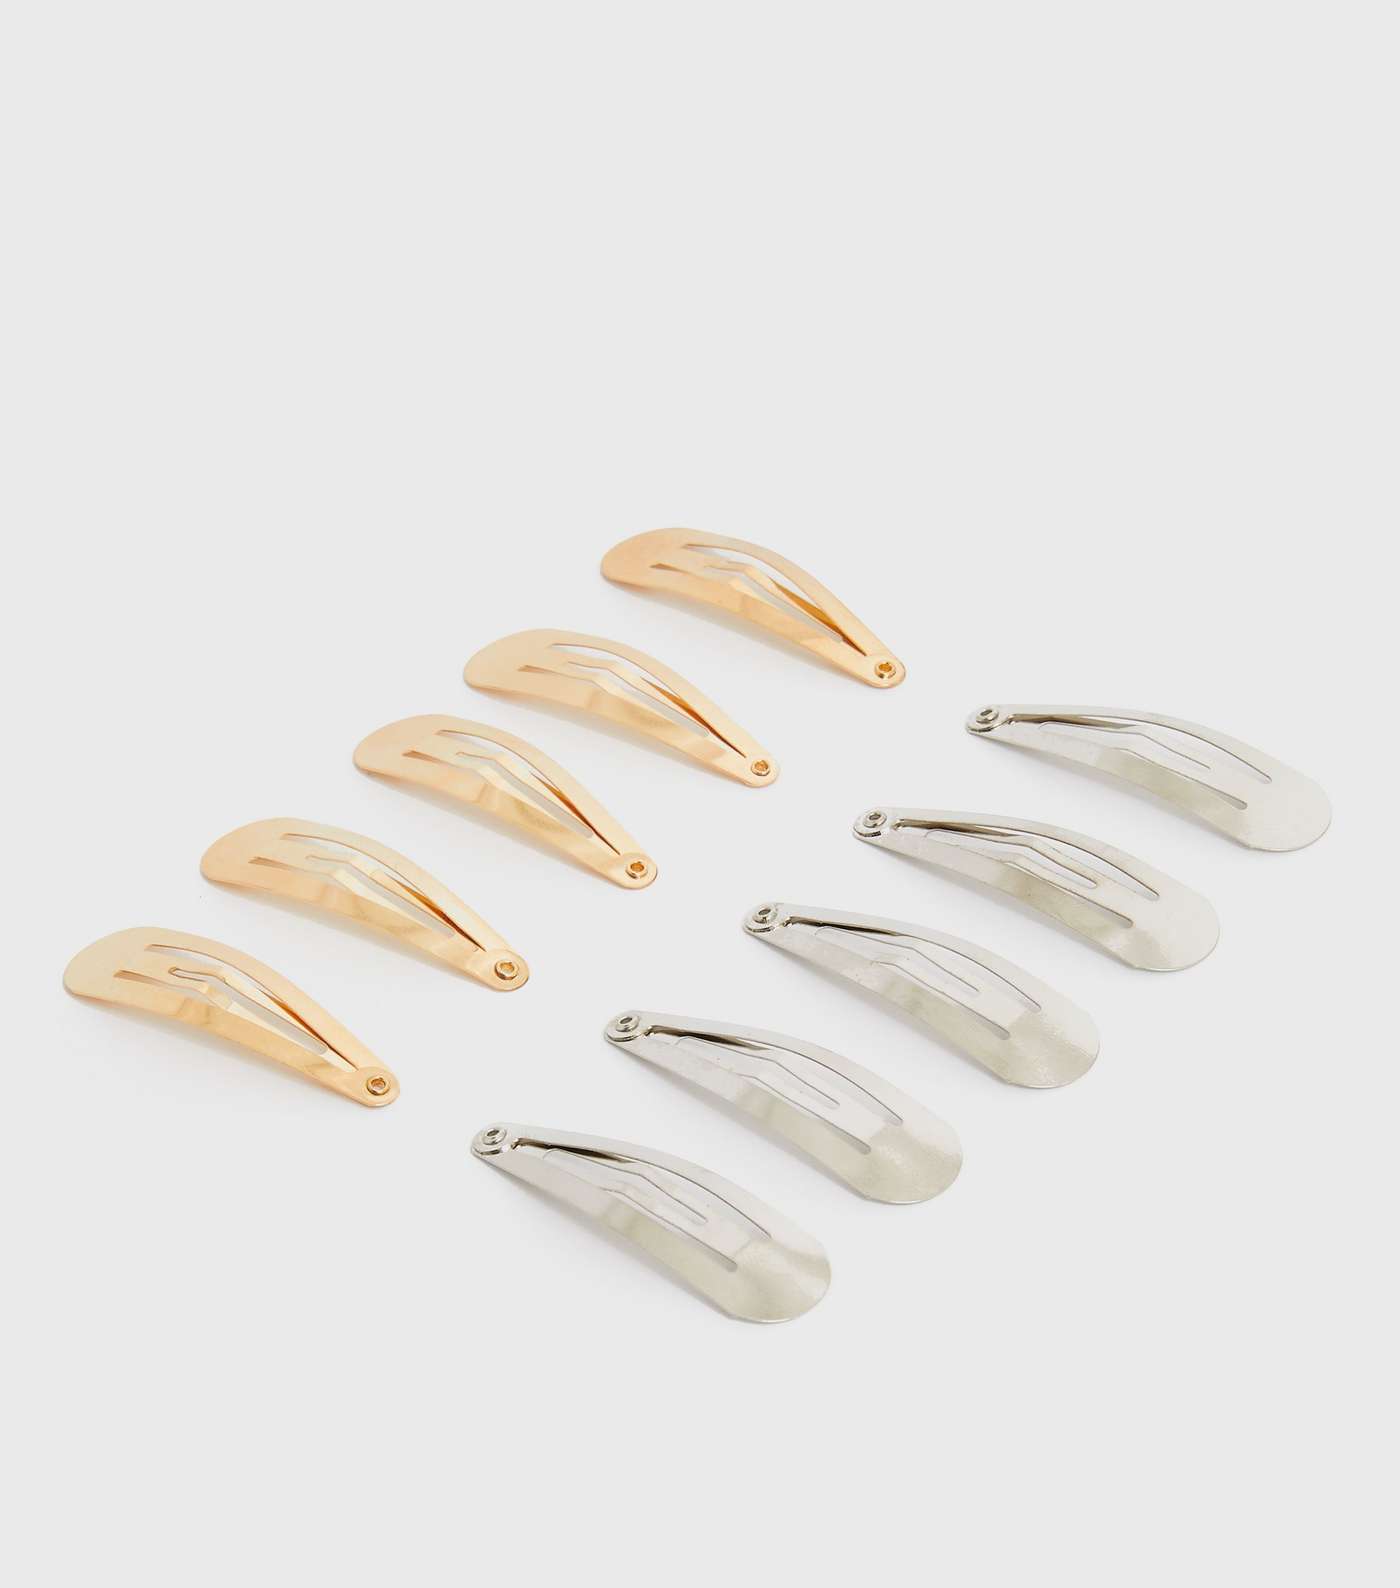 10 Pack Gold and Silver Snap Hair Clips